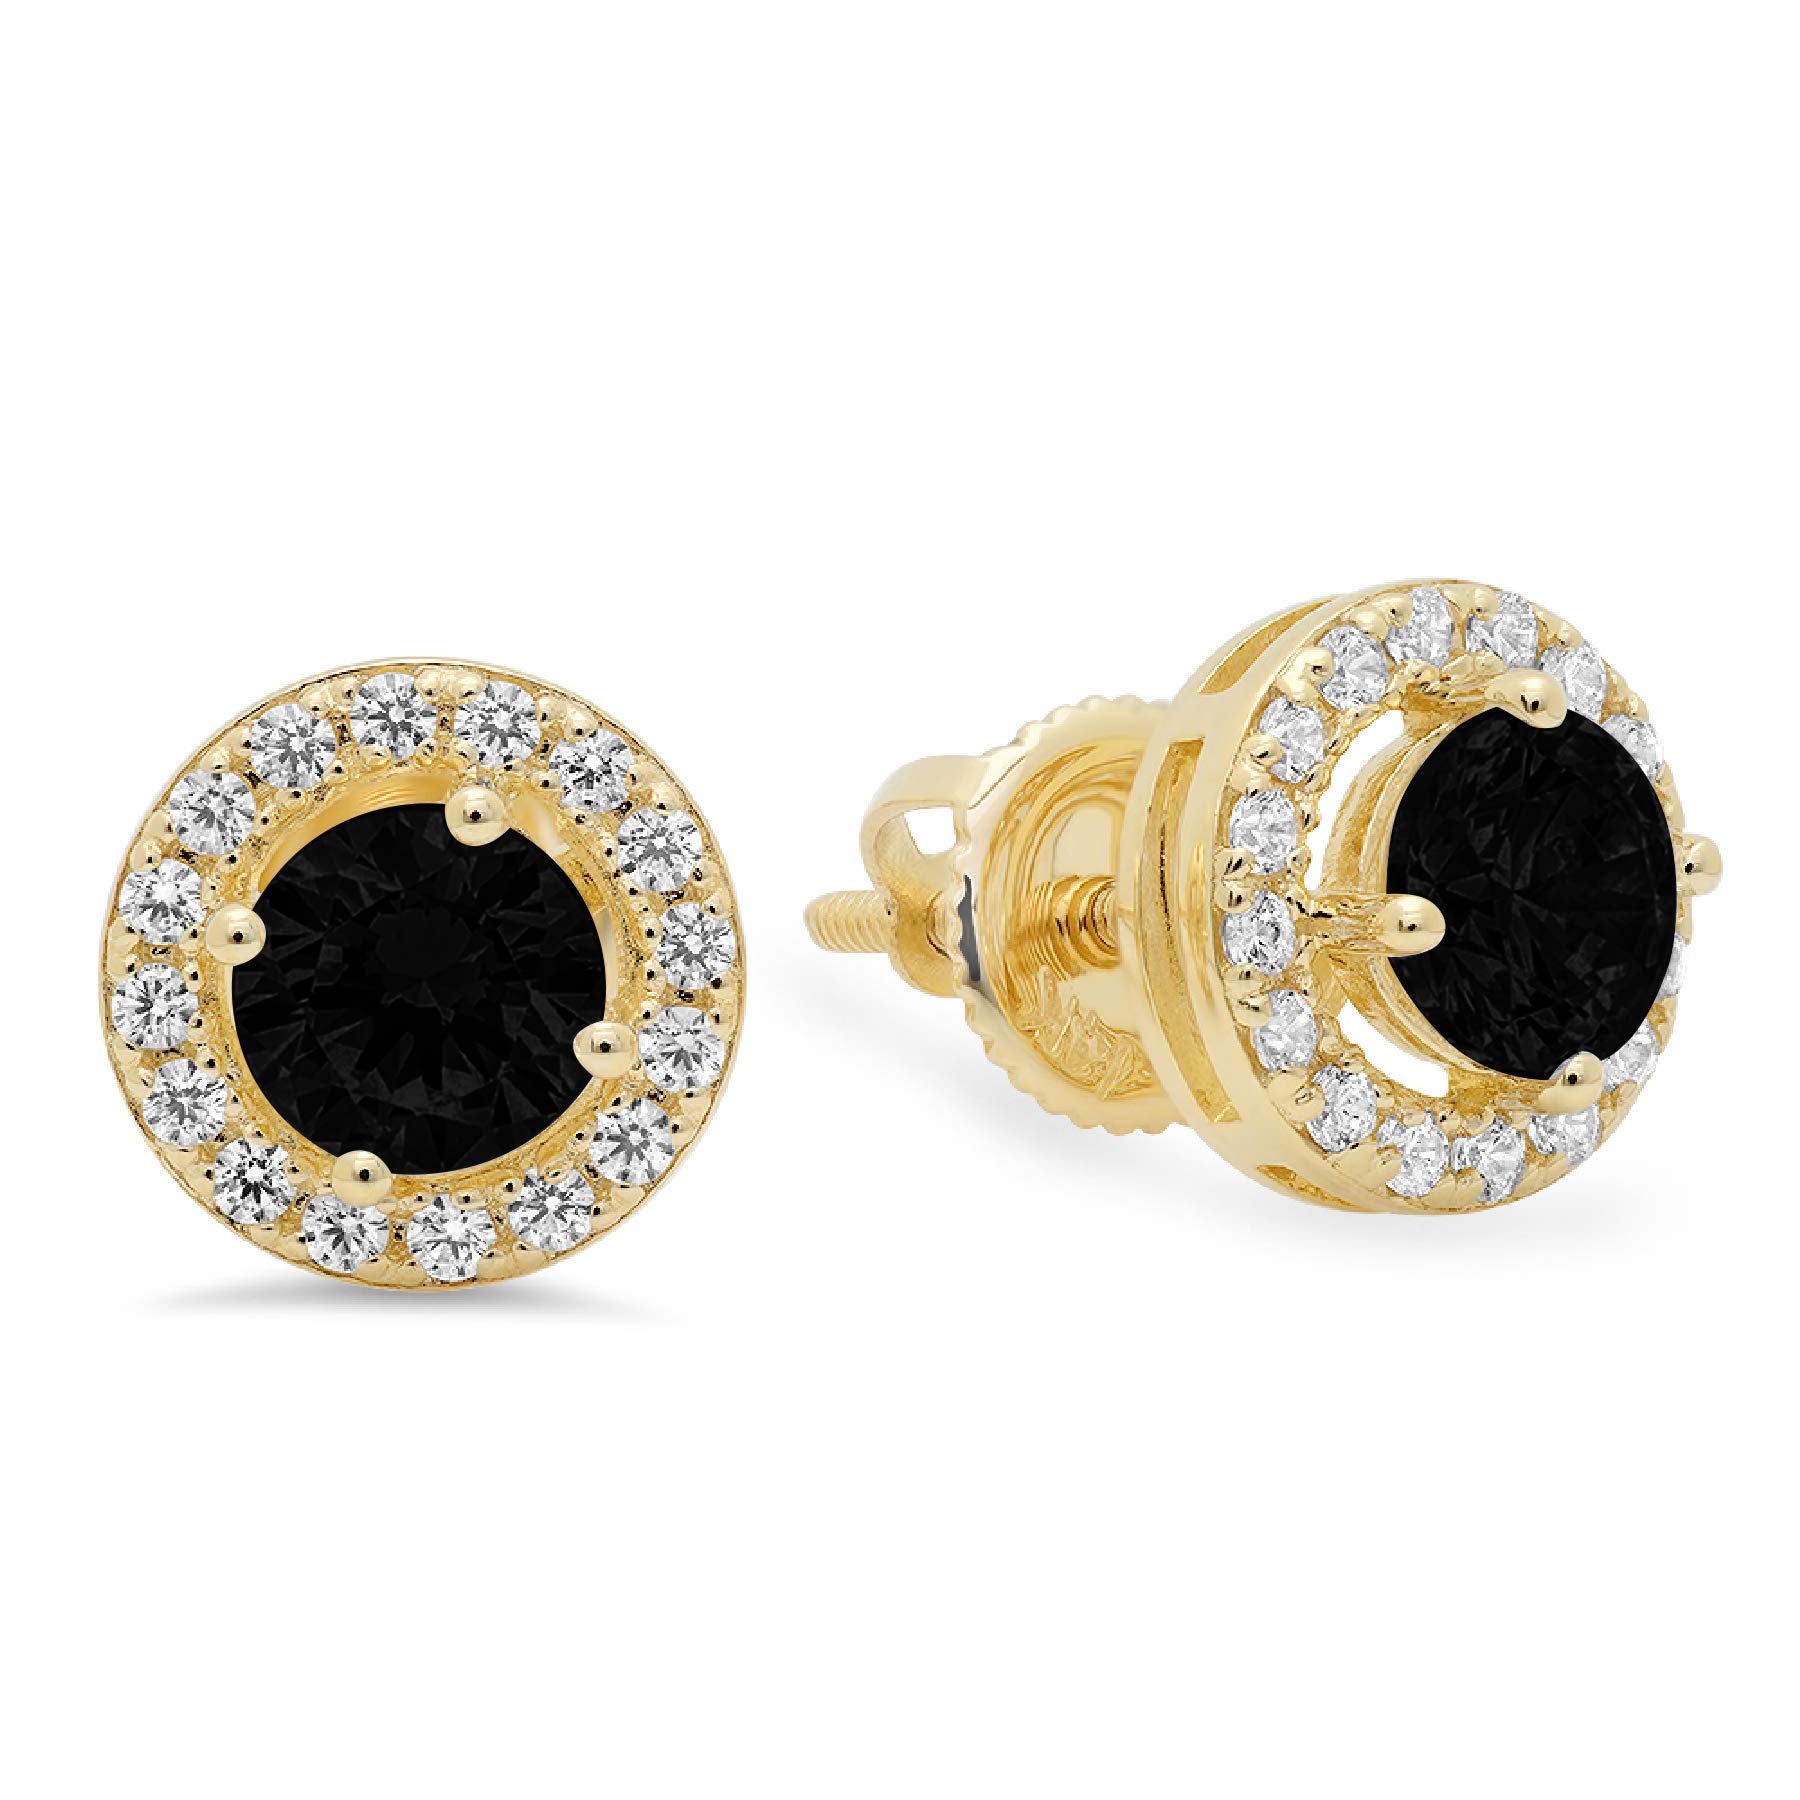 1.60 ct Brilliant Round Cut Halo Solitaire Flawless Genuine Natural Black Onyx Gemstone VVS1 Ideal Pair of Solitaire Stud Screw Back Designer Earrings Solid 14k Yellow Gold